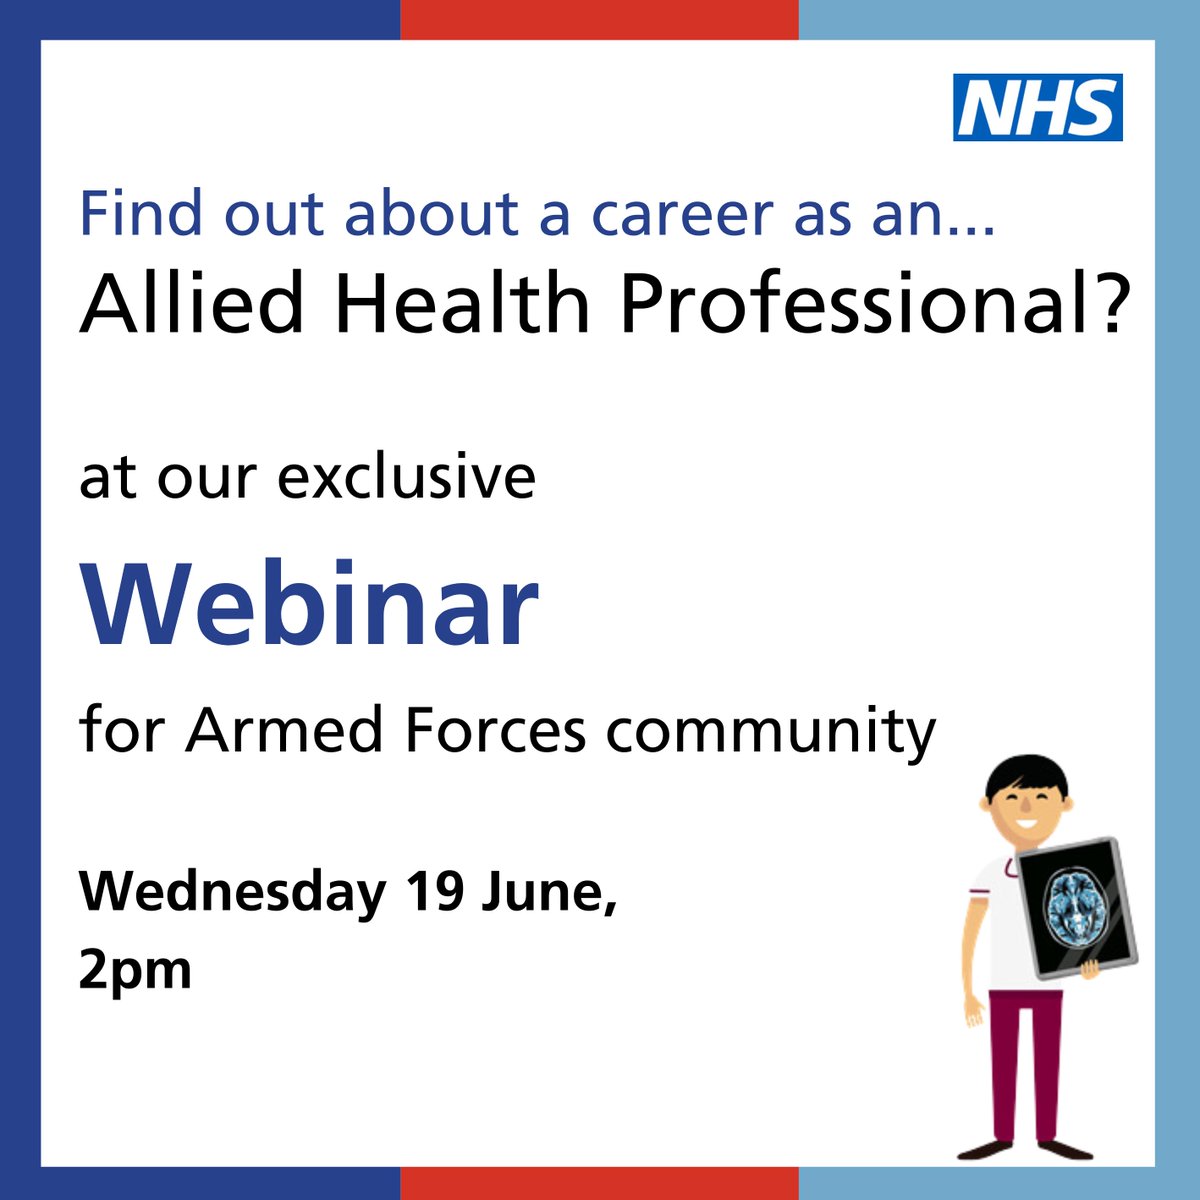 Are you from the Armed Forces community looking for your next Career? 
Join our webinar on Wed 19 June 2024 at 2pm for an overview of the 14 Allied Health Professions (AHPs) 

email armedforces@gstt.nhs.uk for link to register

#careerchangerstoAHPs
@NHSEmployers 
@NHSHEE_LDN